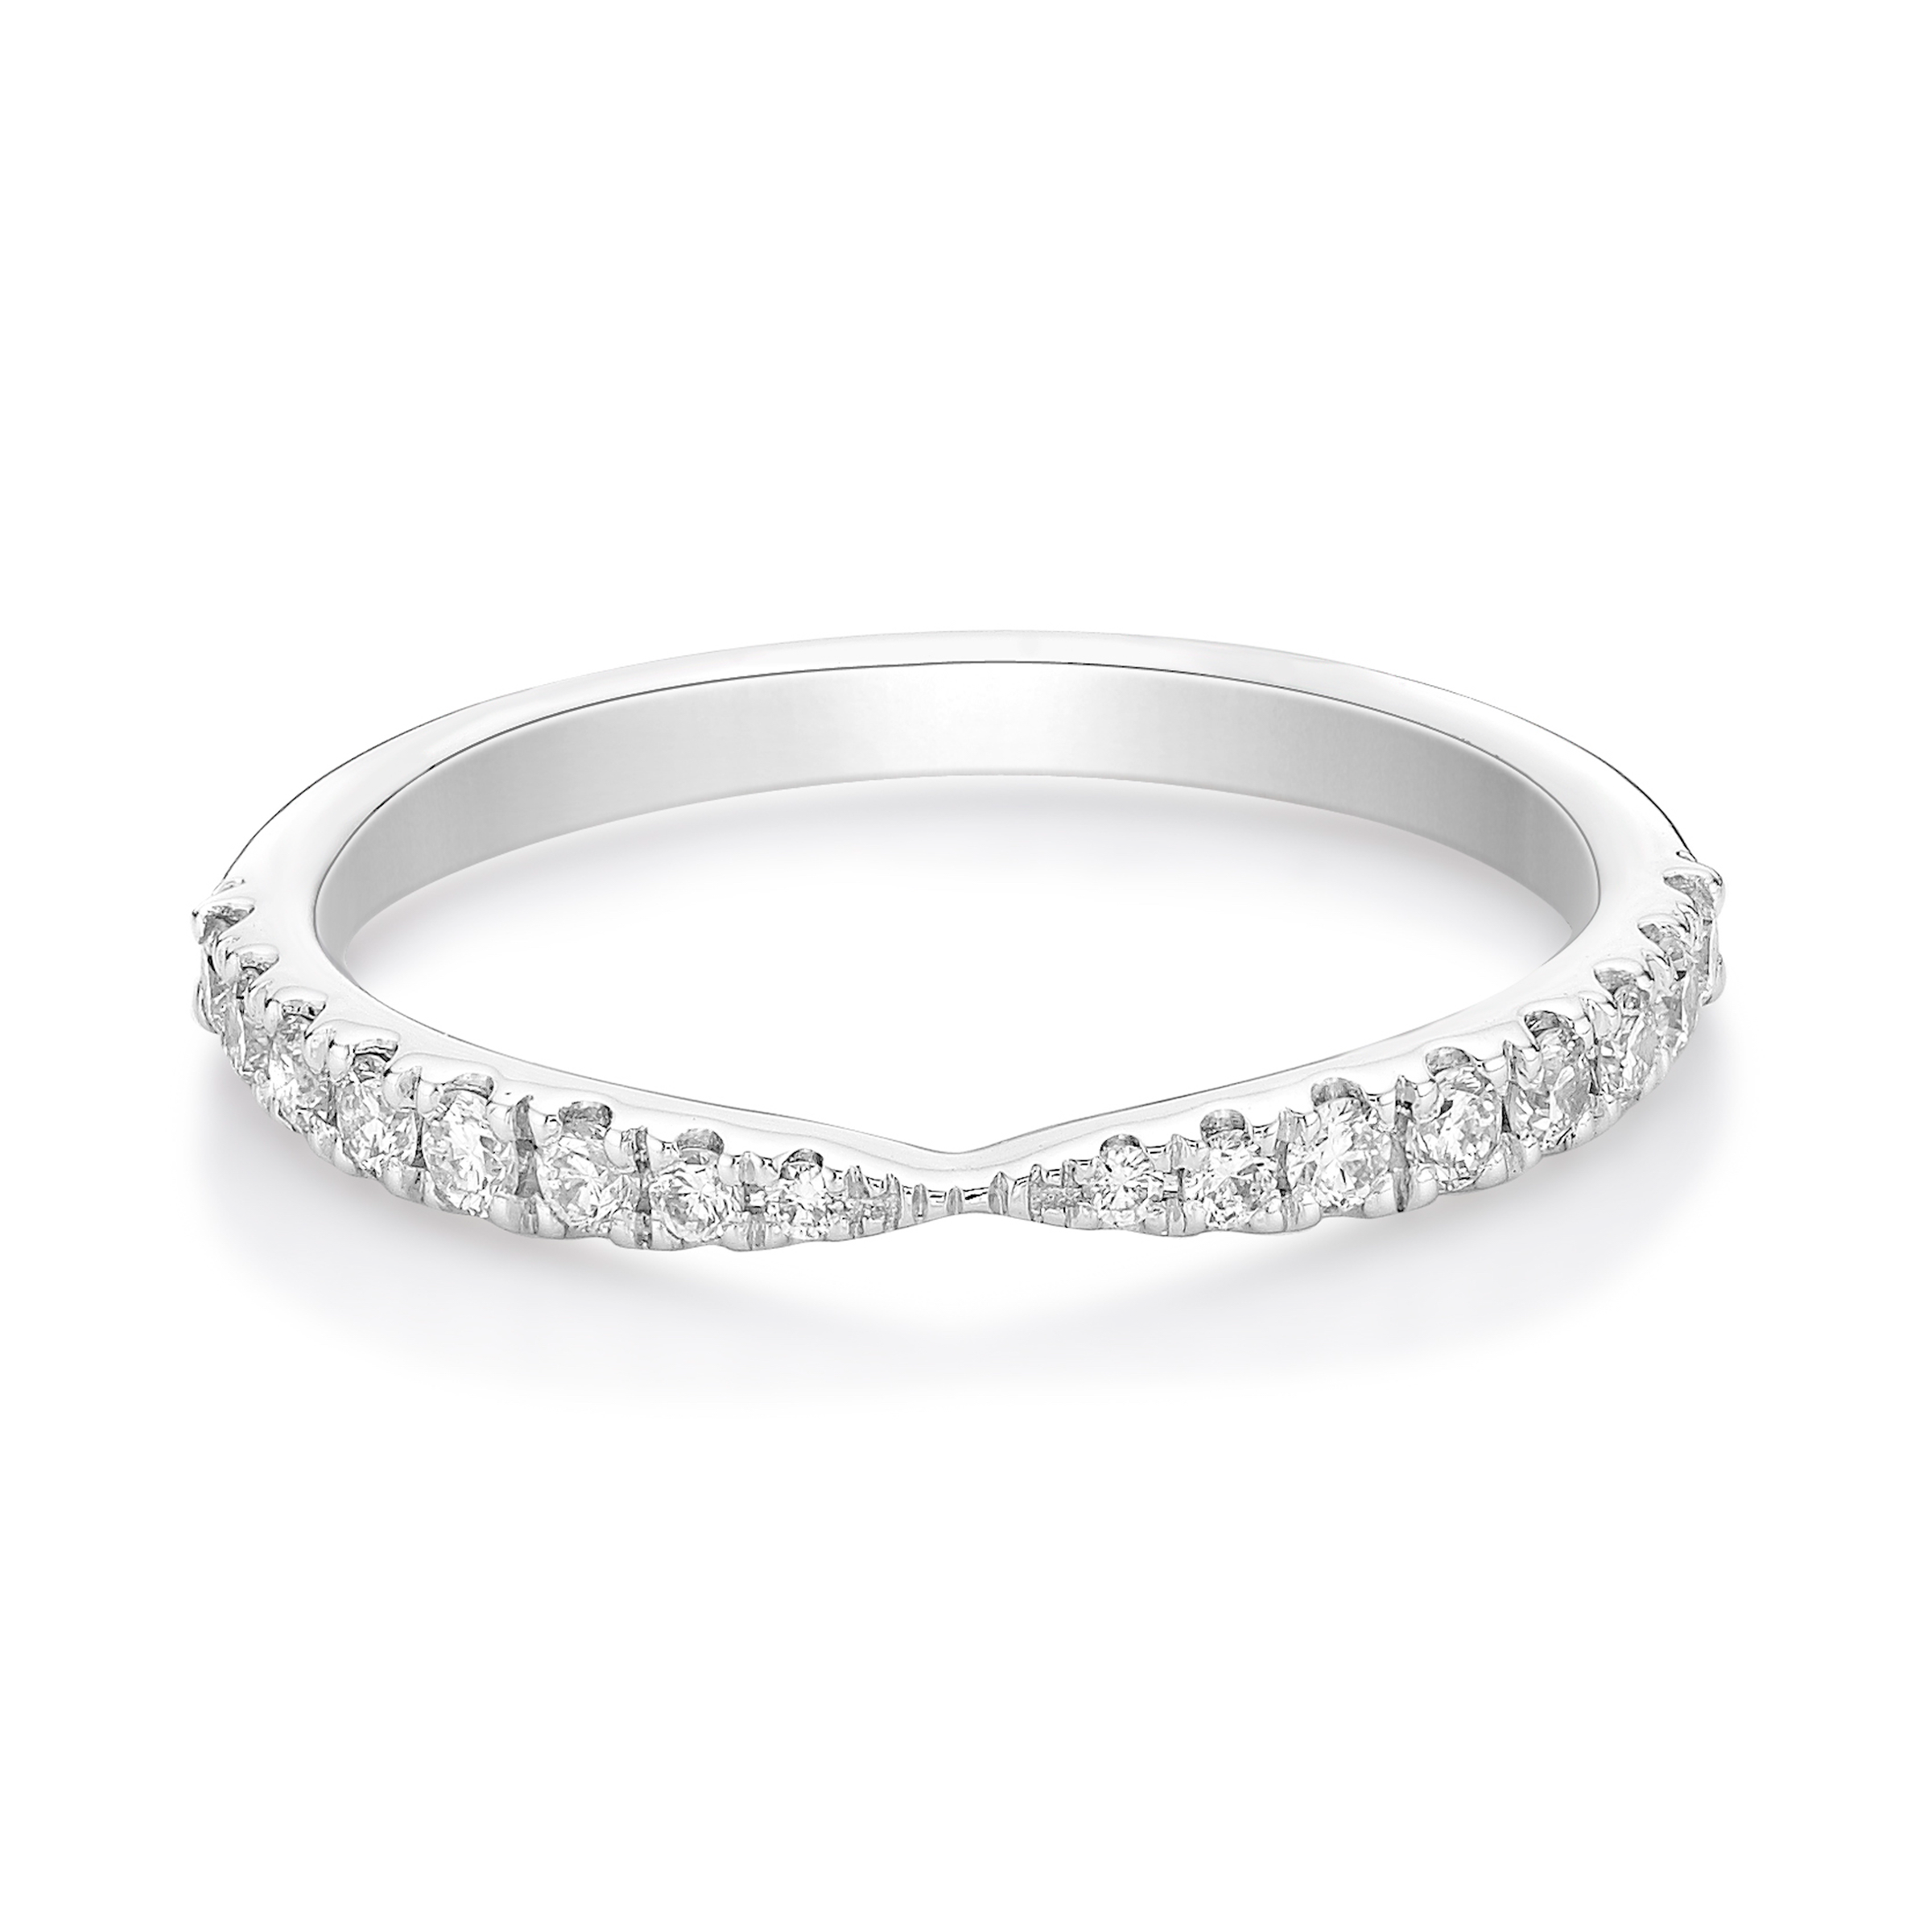 PINCHED MICRO CLAW SET DIAMOND WEDDING ETERNITY RING